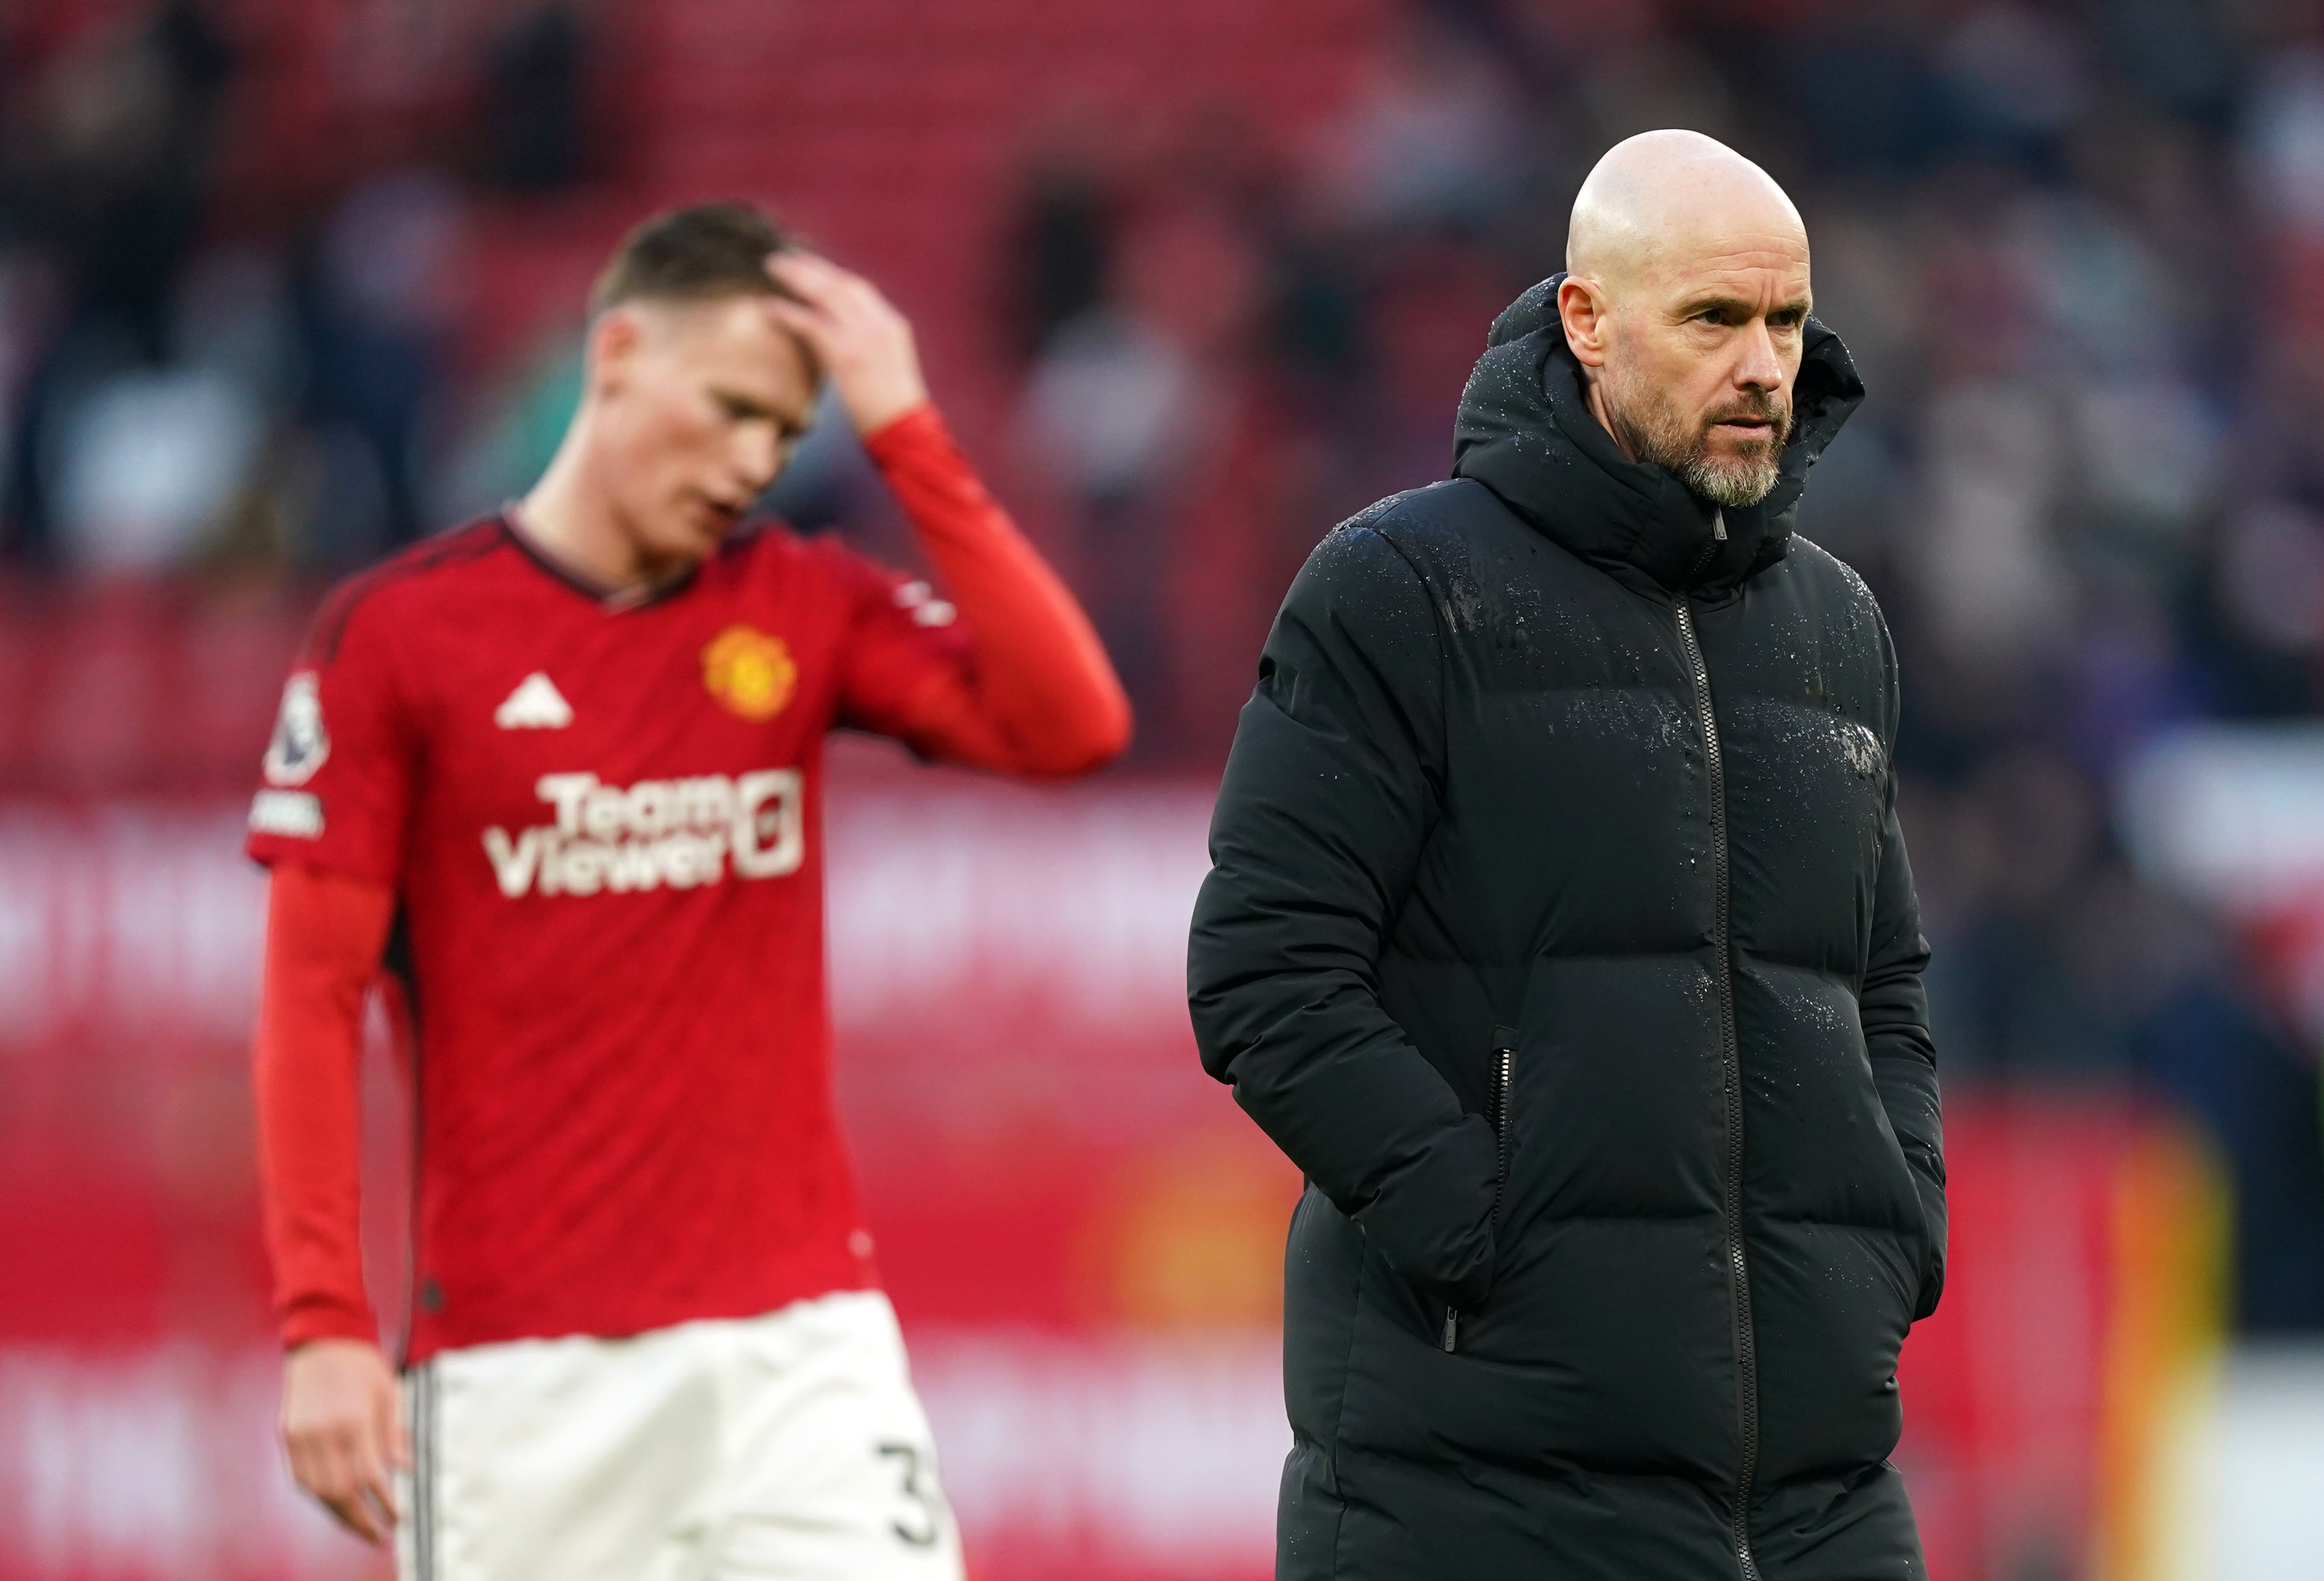 Erik ten Hag hopes his team respond positively after losing to Fulham at the weekend